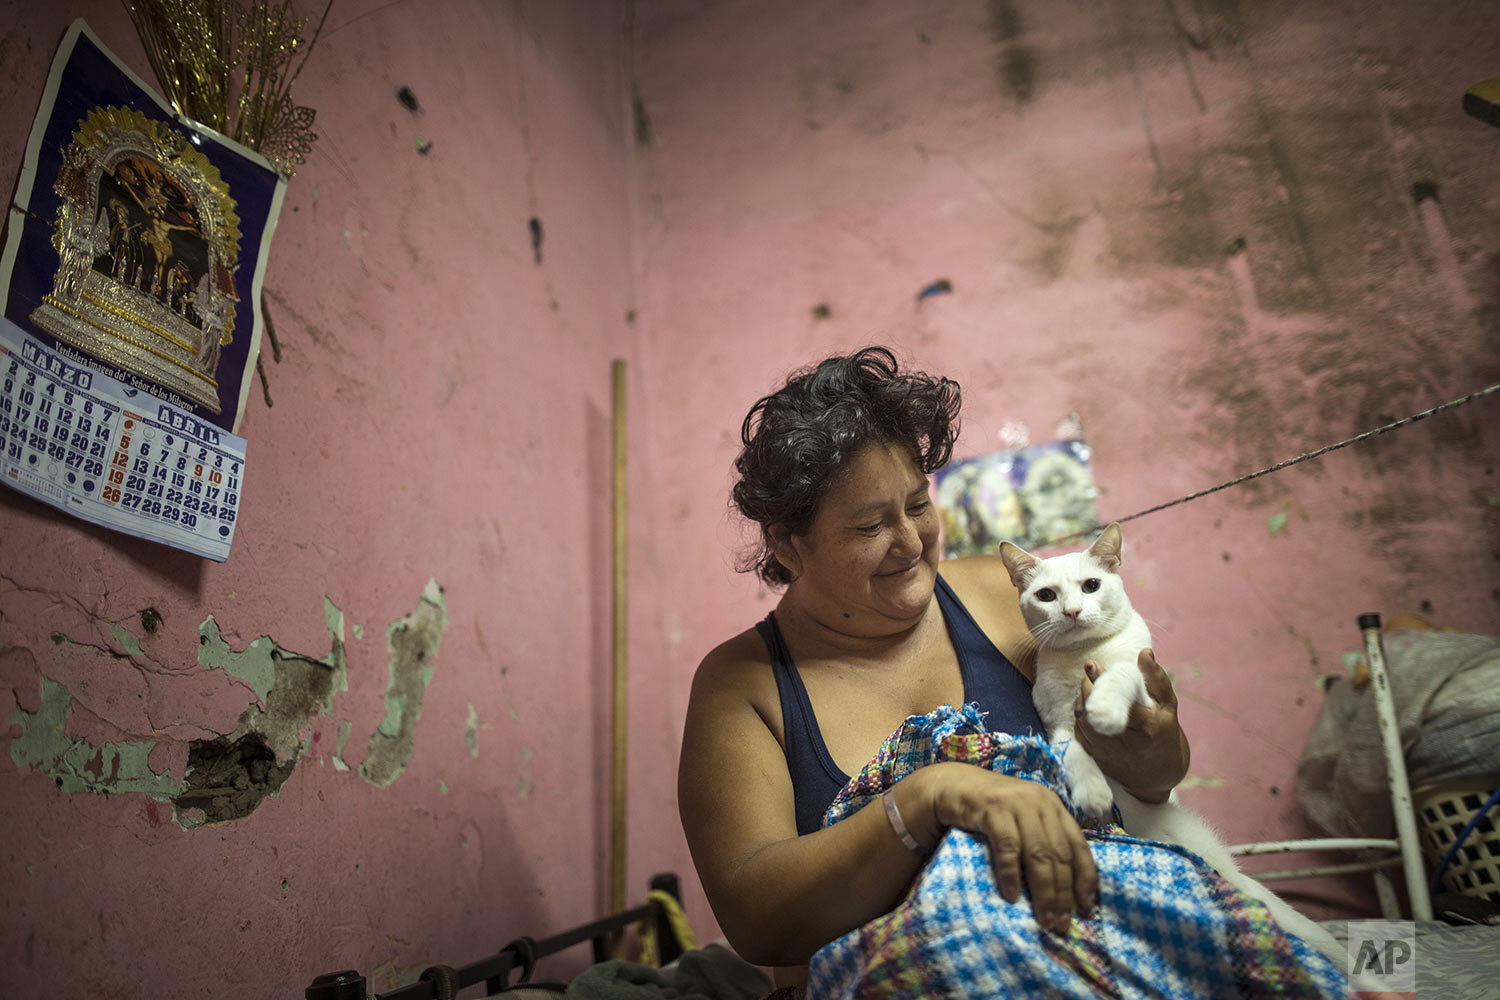  In this April 3, 2020 photo, Zulema Aguinaga smiles at her pet cat as she starts the day inside her small room she shares with her son and elderly aunt, in a deteriorated house nicknamed “Luriganchito,” after the country’s most populous prison, in L